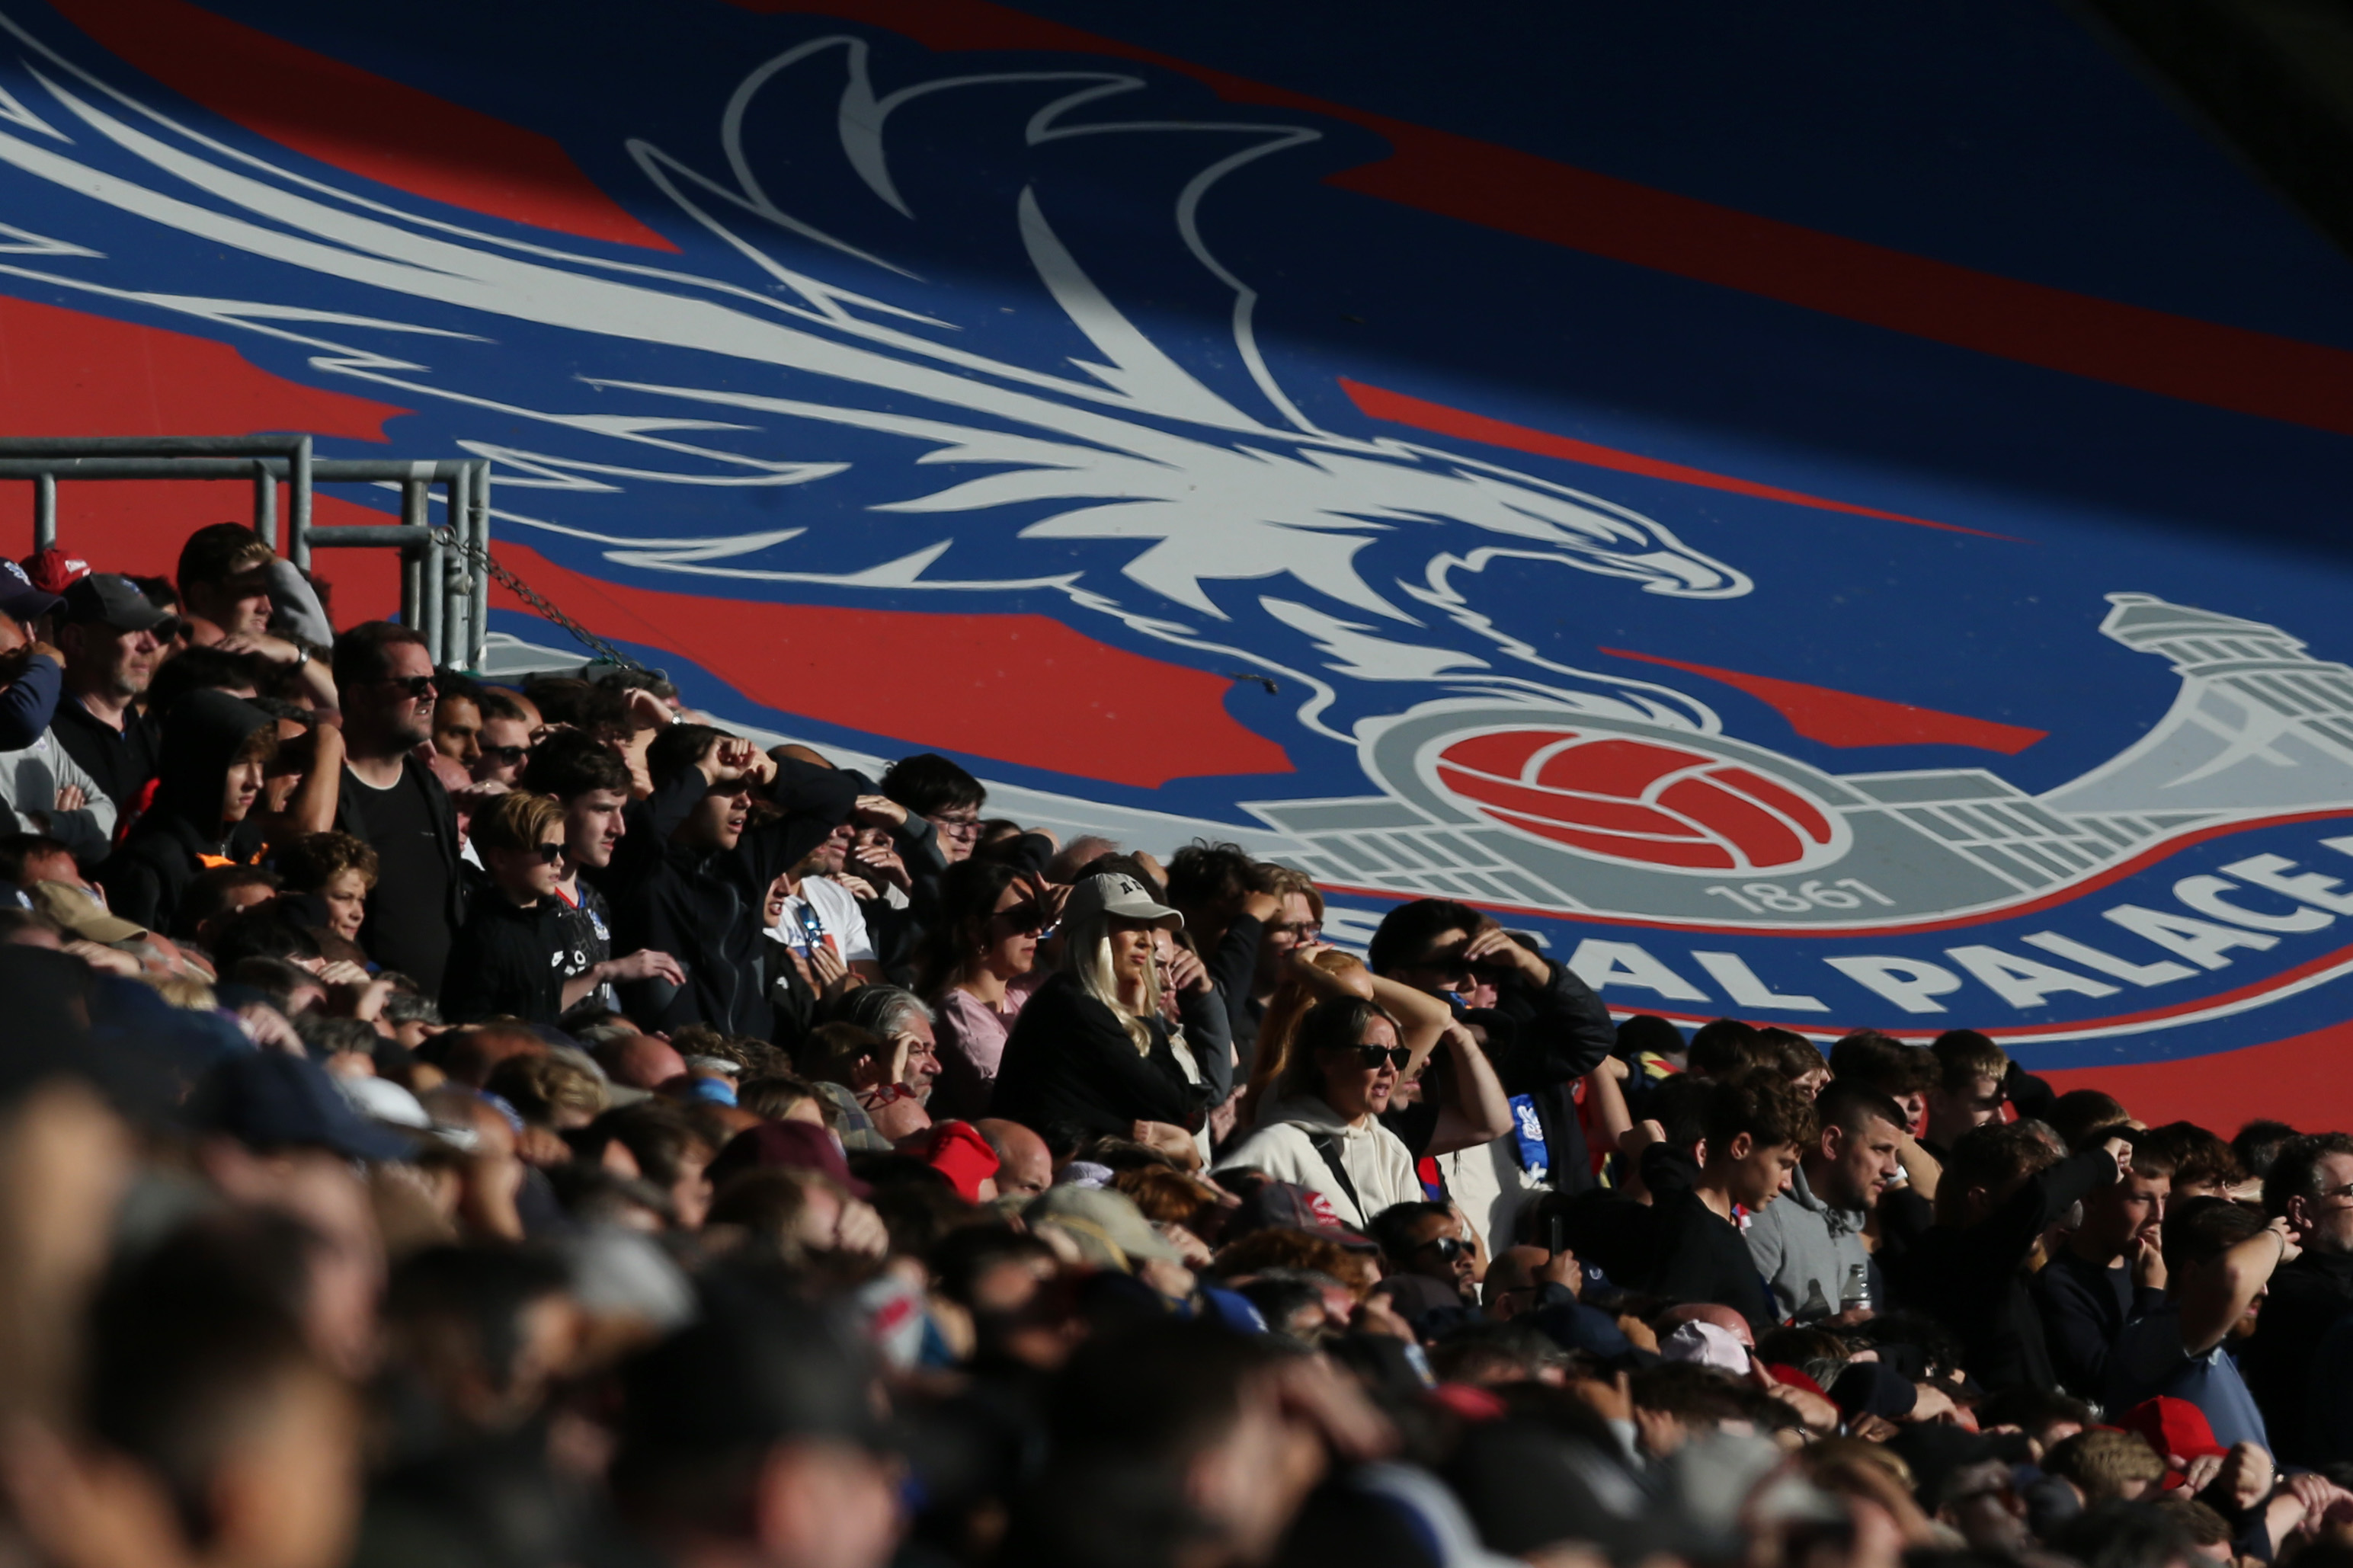 Crystal Palace ultras fuming after claiming club have unfairly targeted them